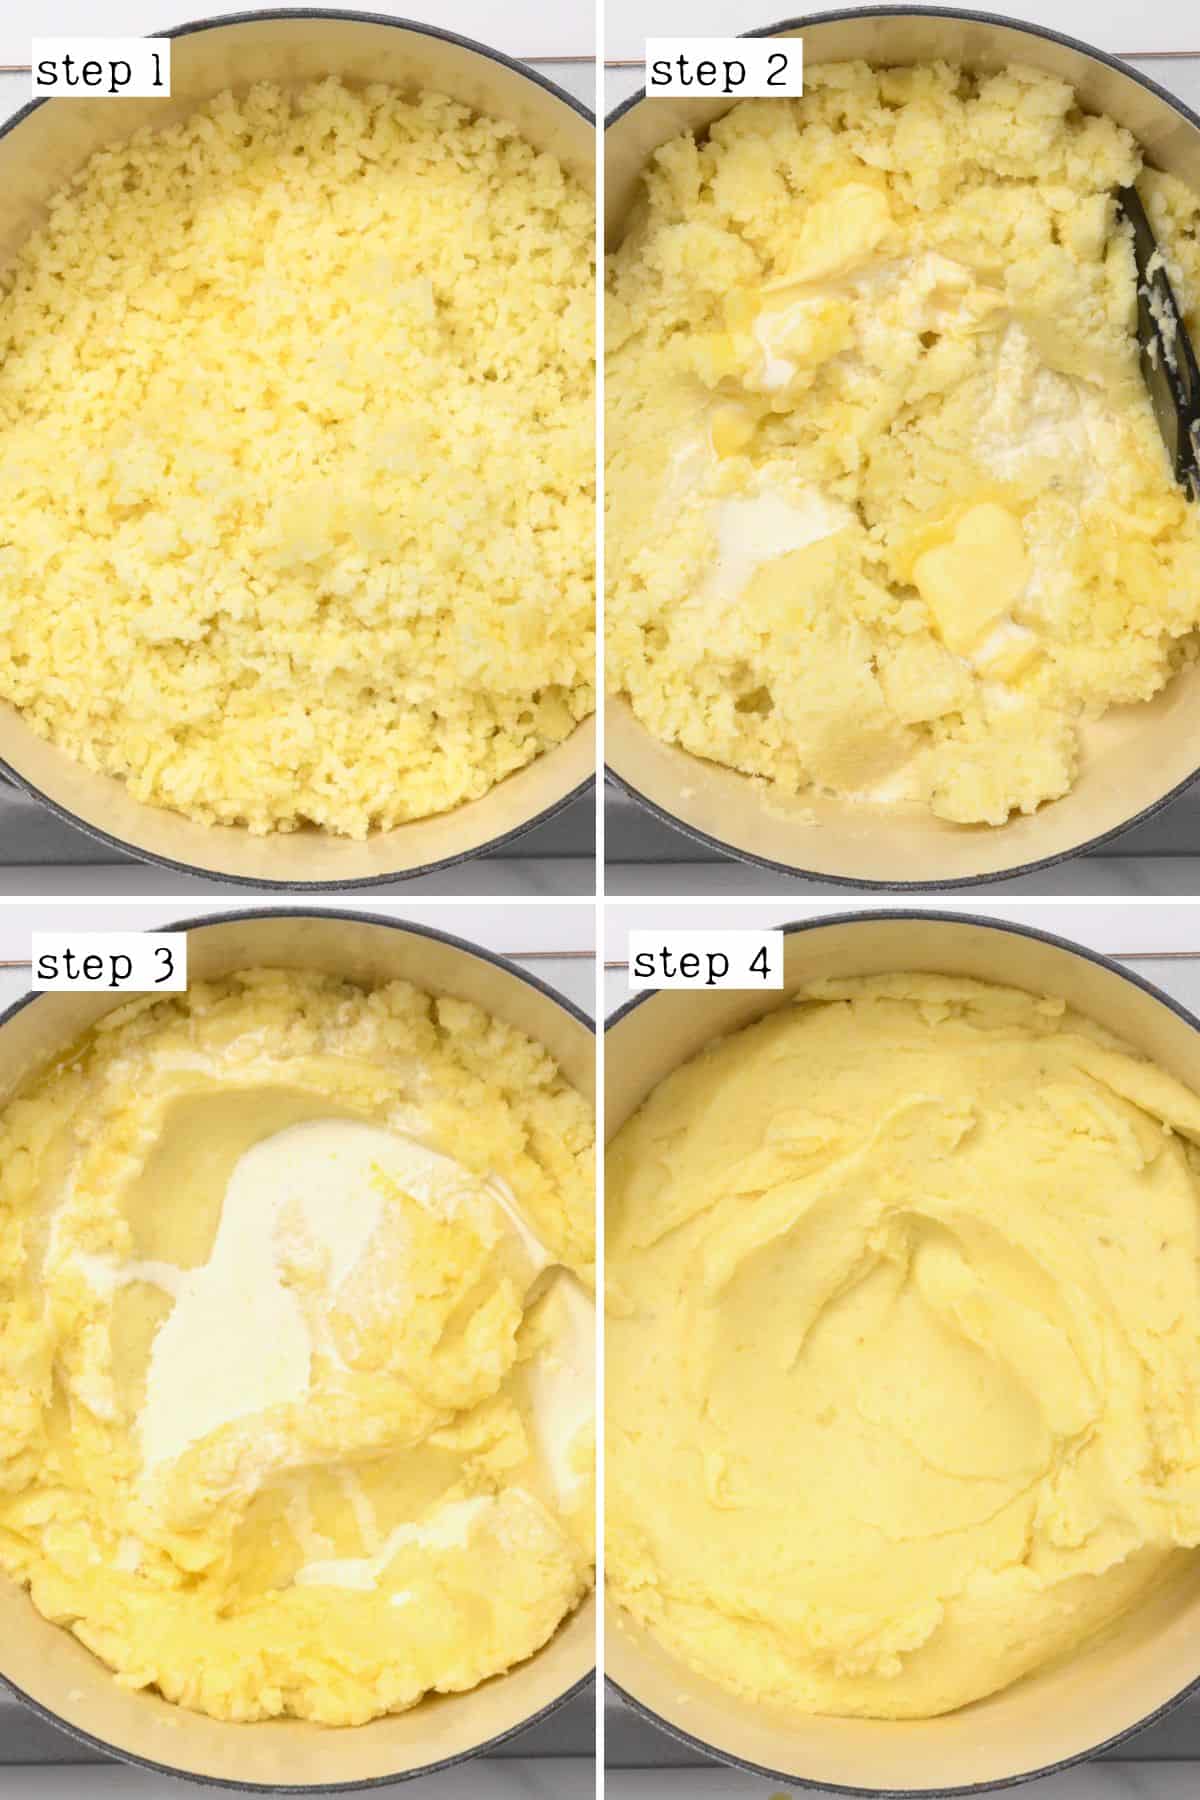 Steps for making mashed potatoes